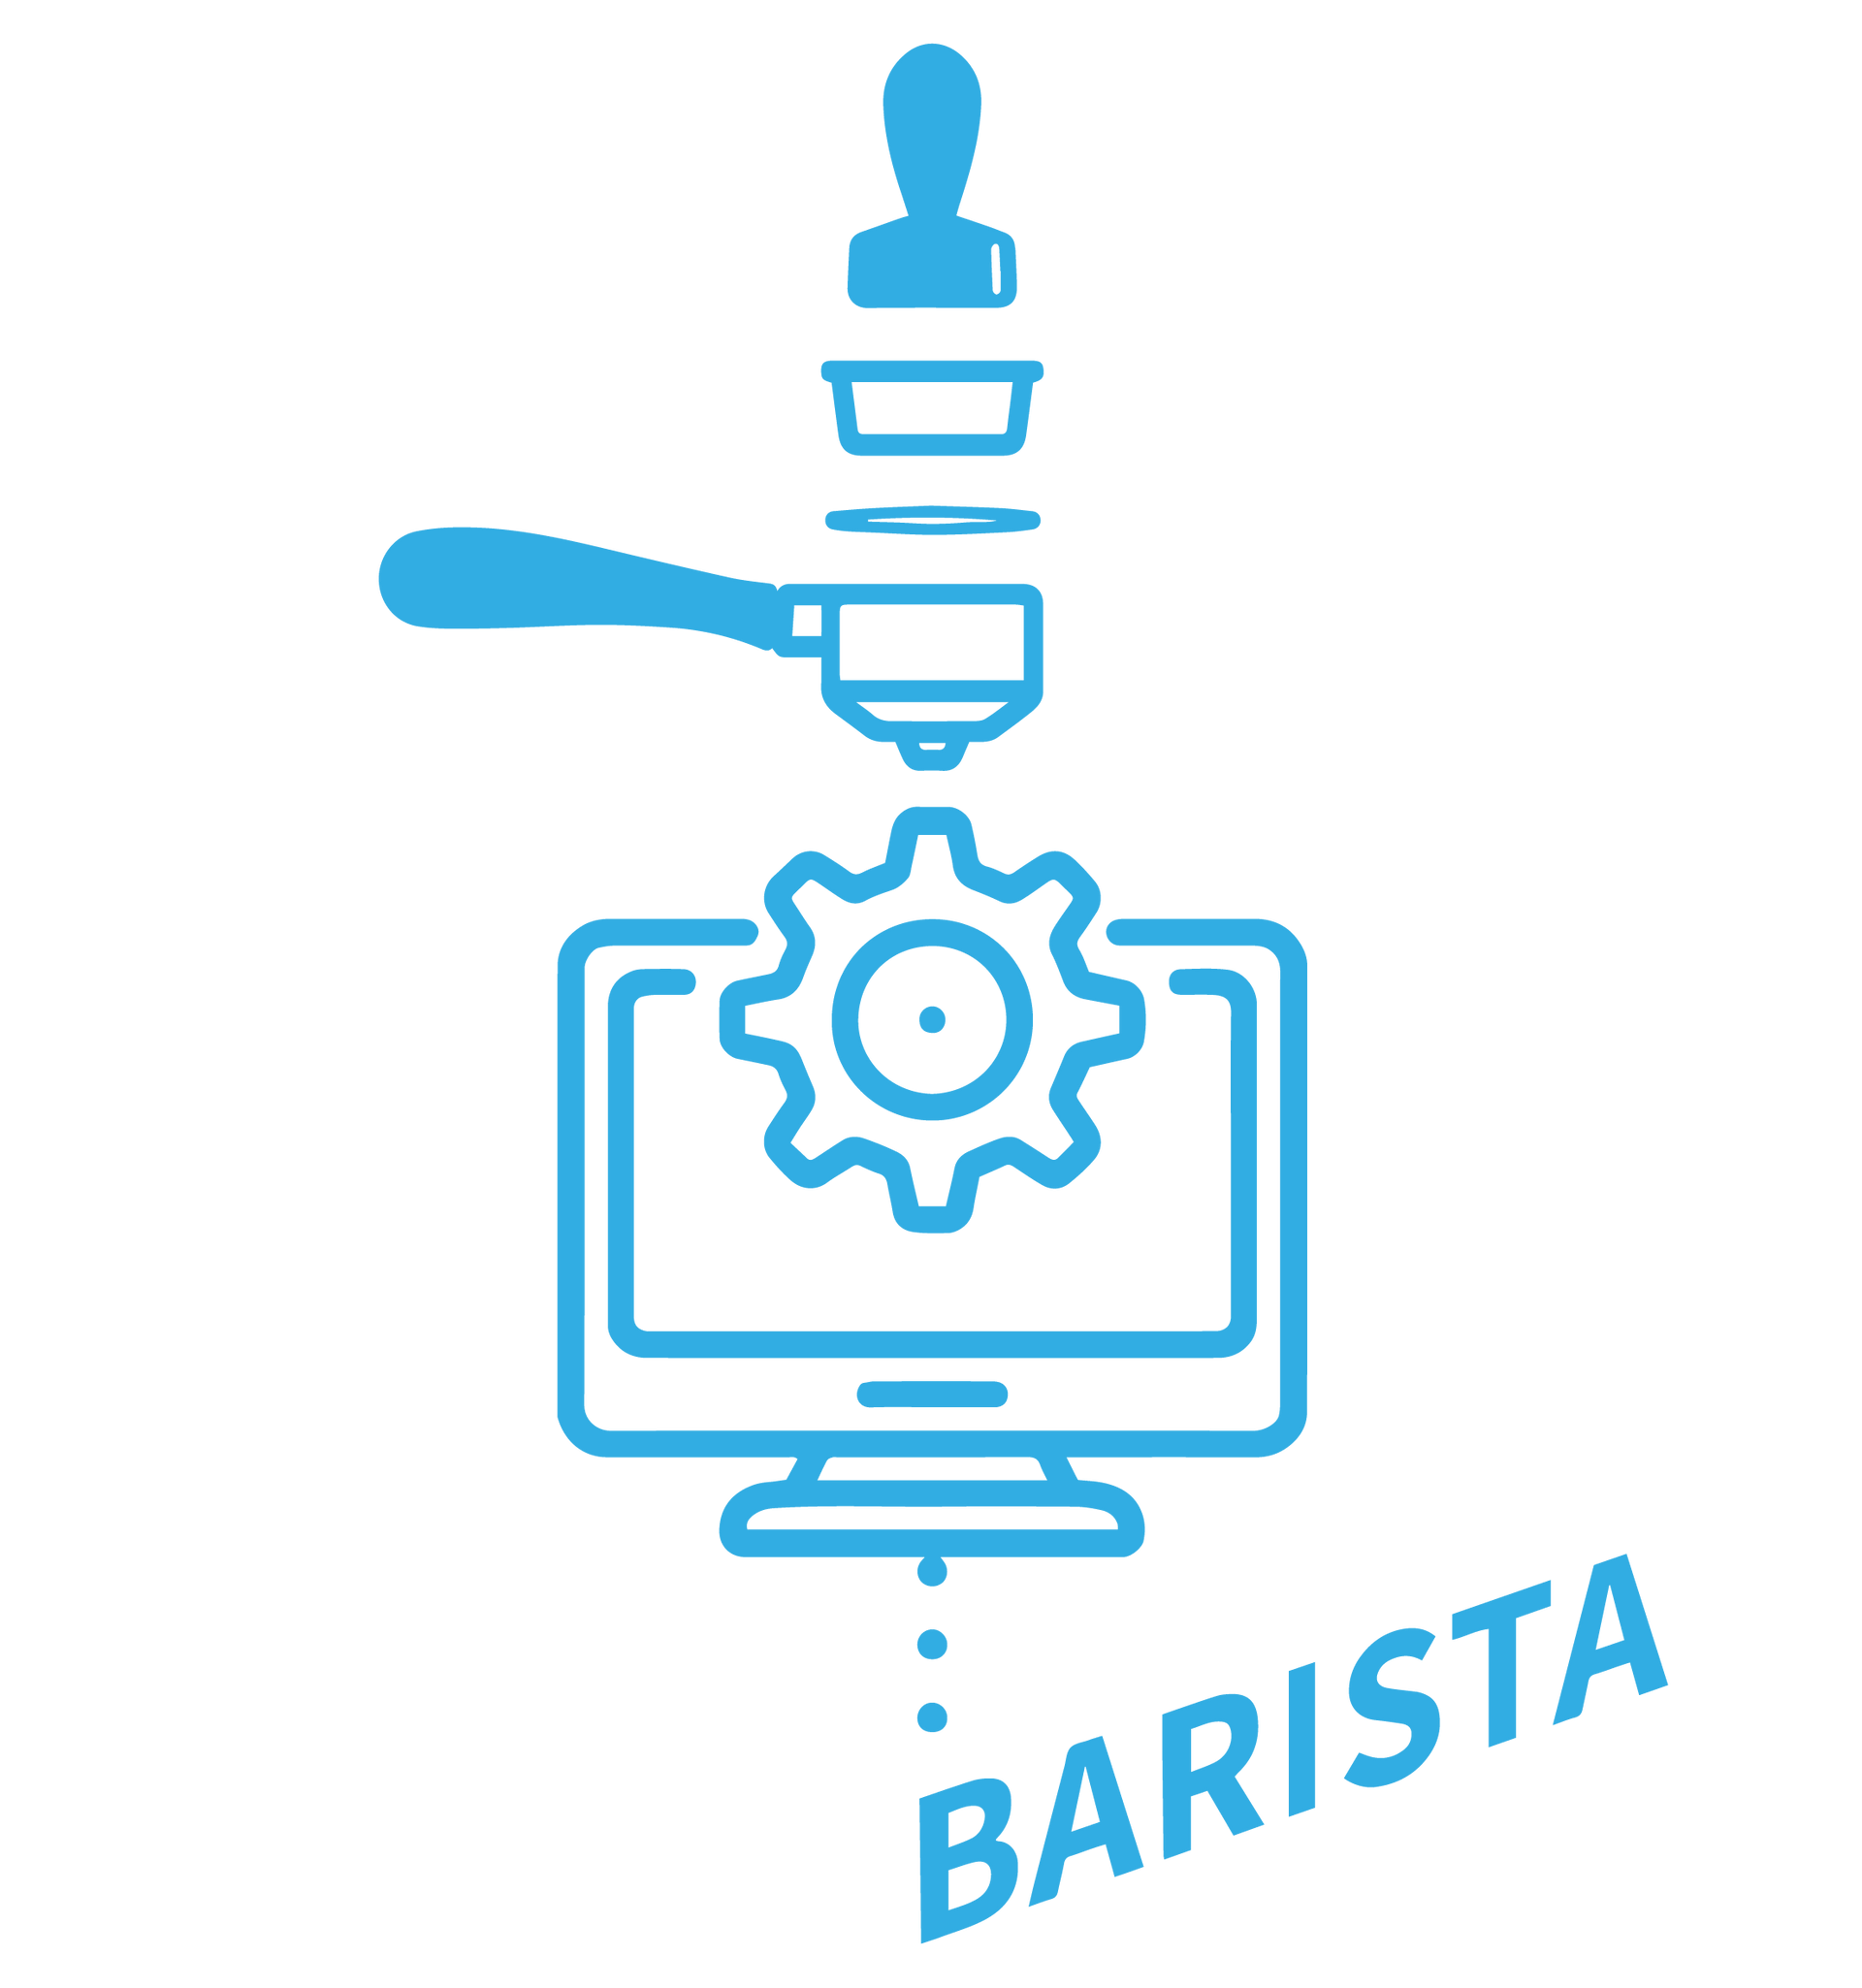 Home Barista online course - e-learning platform